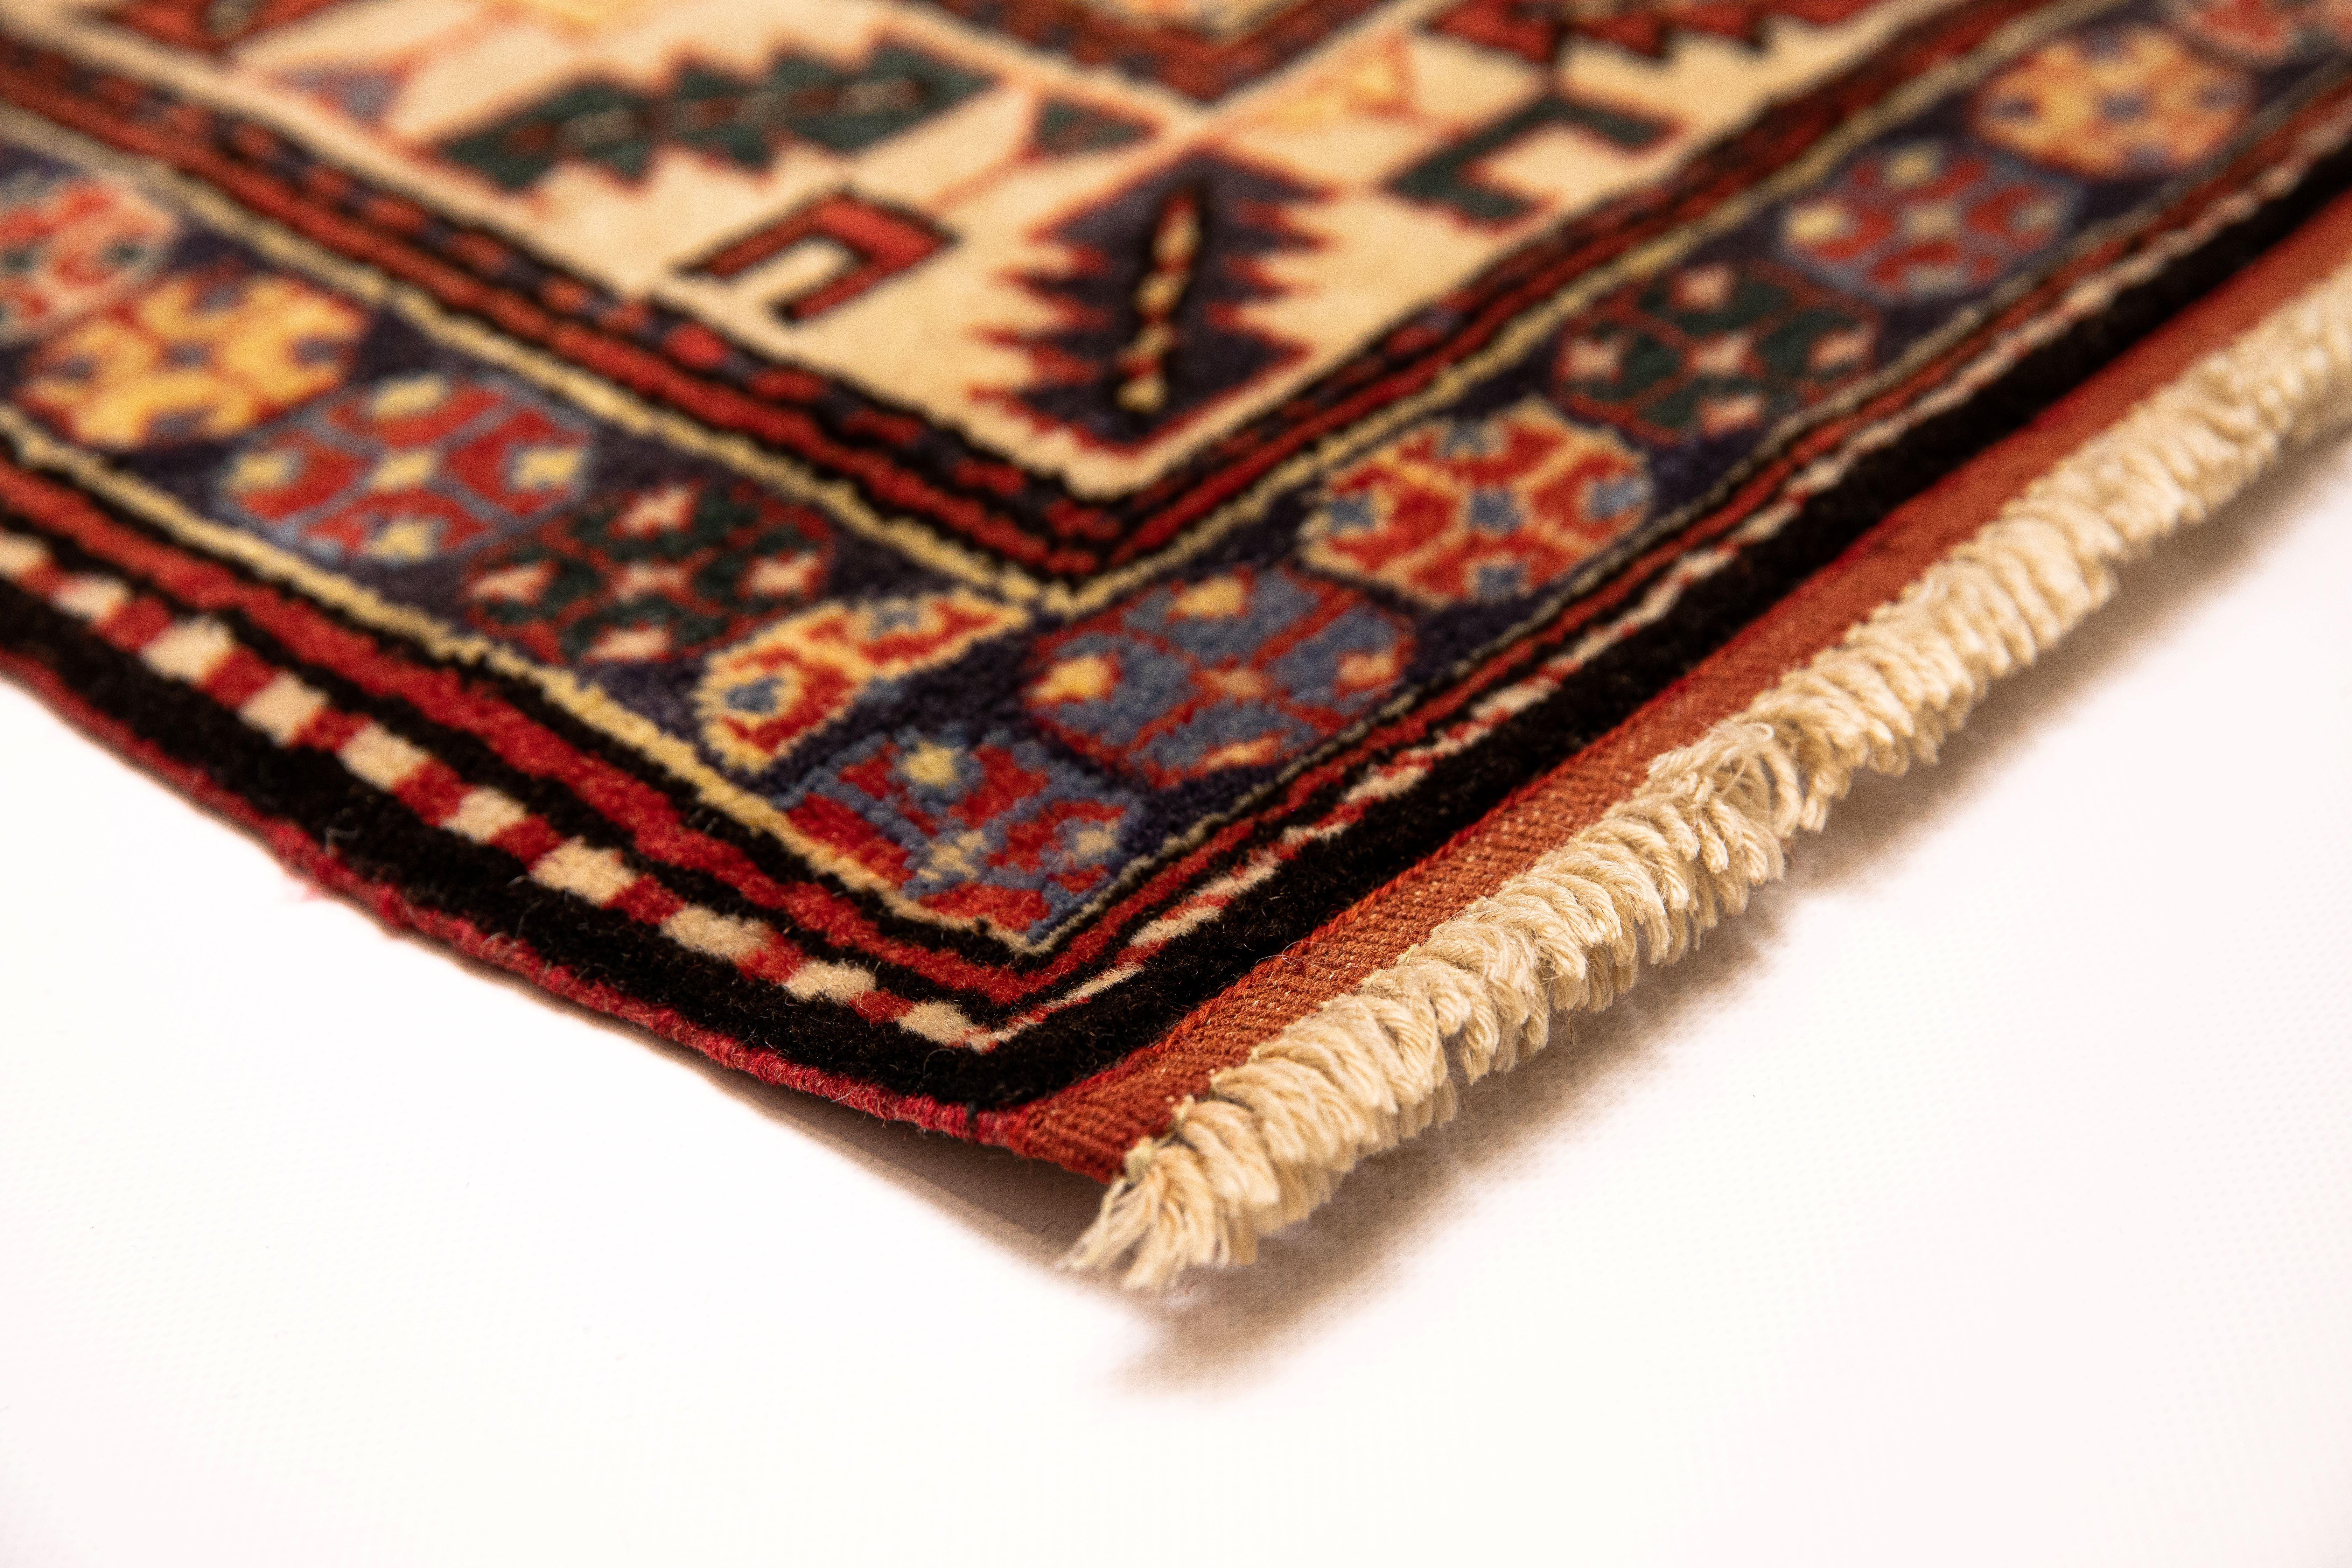 This is an exceptional rug, brand new, and made under special circumstances. Let us tell you briefly the back story.
Modern day Azerbaijan with its many mountains and valleys, as in past centuries is a mosaic of different tribal peoples, isolated